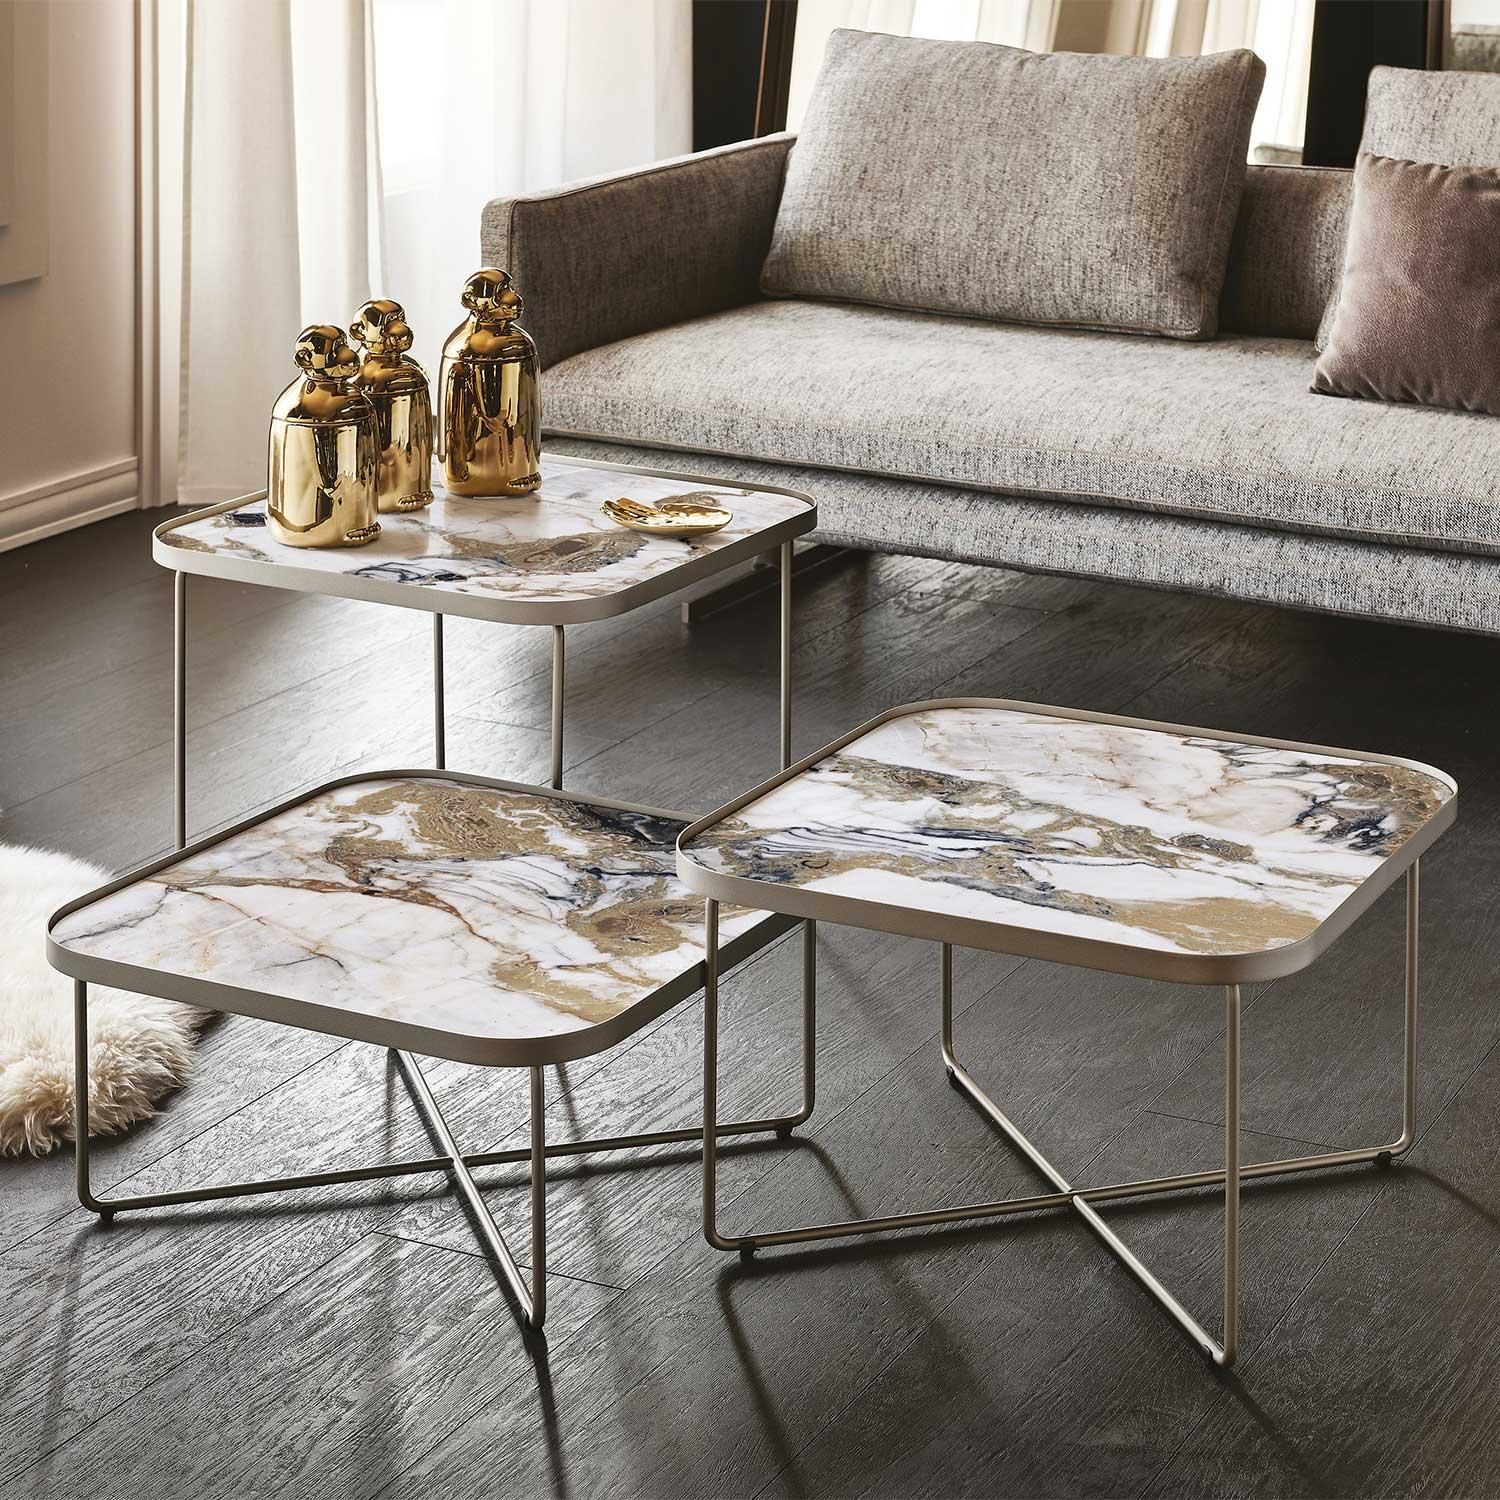 Benny Ceramic And Metal Occasional Tablecattelan | Diotti With Occasional Coffee Tables (View 4 of 15)